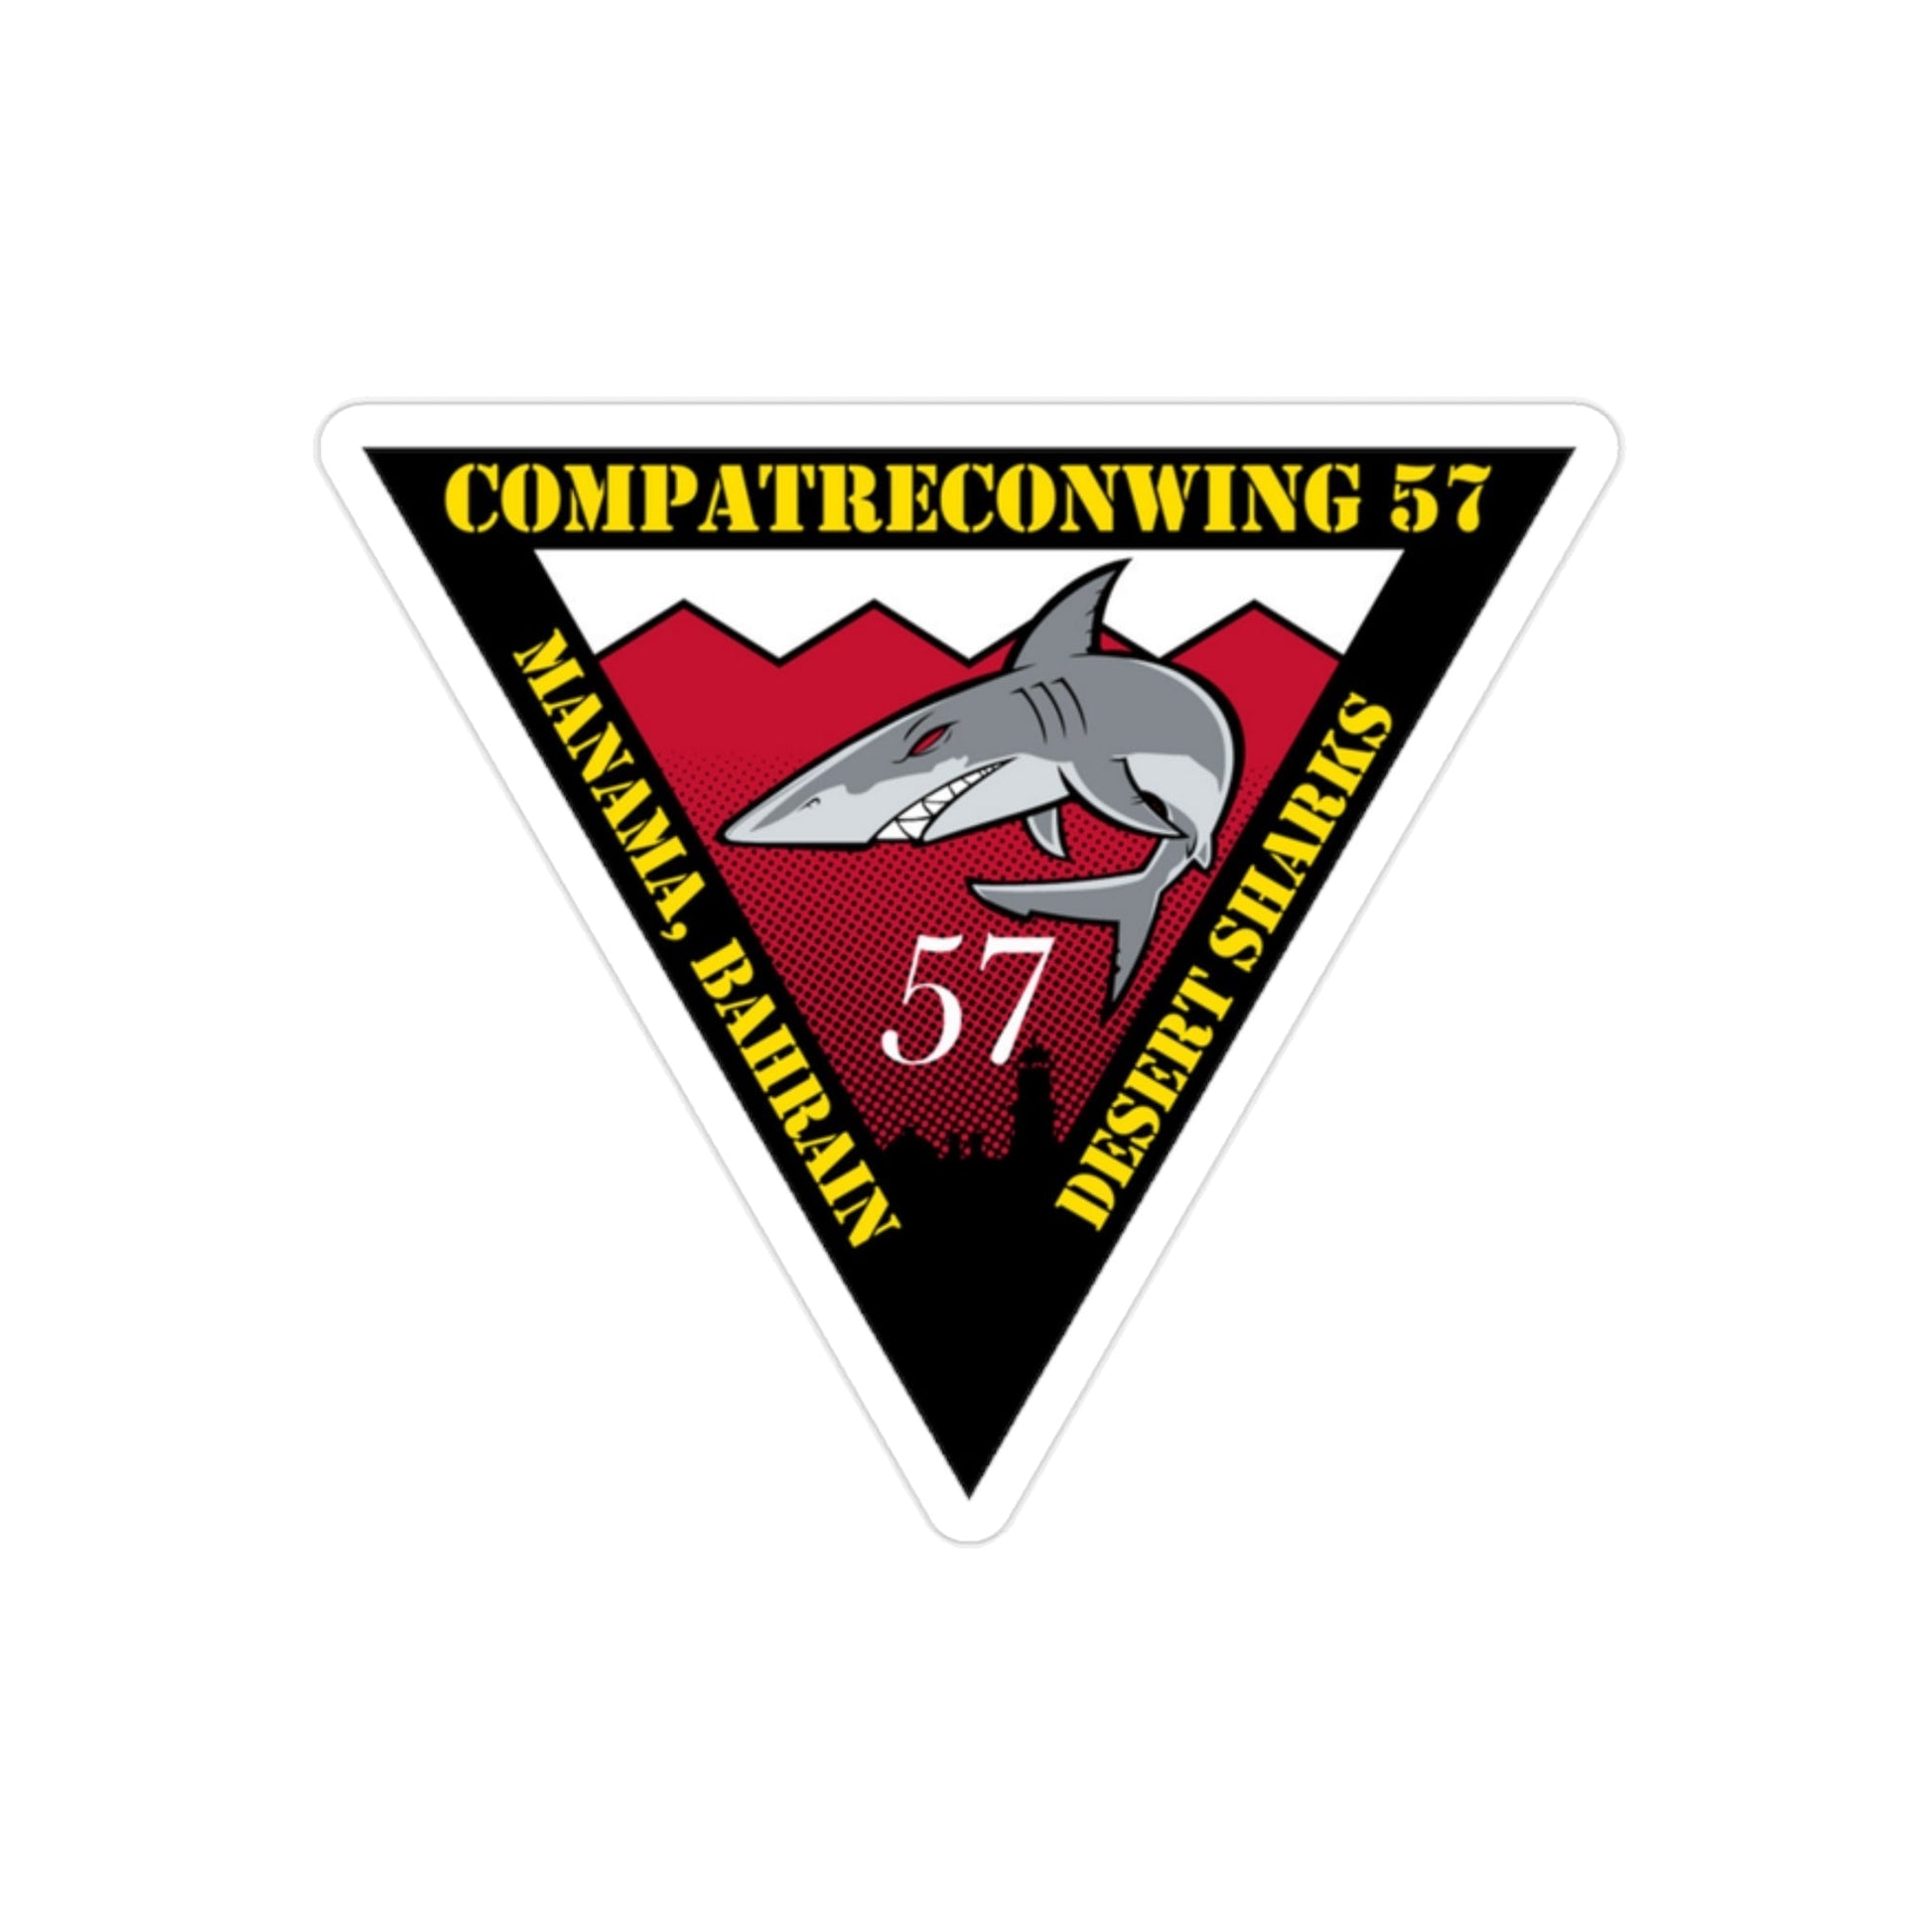 COMPATRECONWING 57 Commander Patrol and Reconnaissance Wing 57 (U.S. Navy) Transparent STICKER Die-Cut Vinyl Decal-2 Inch-The Sticker Space